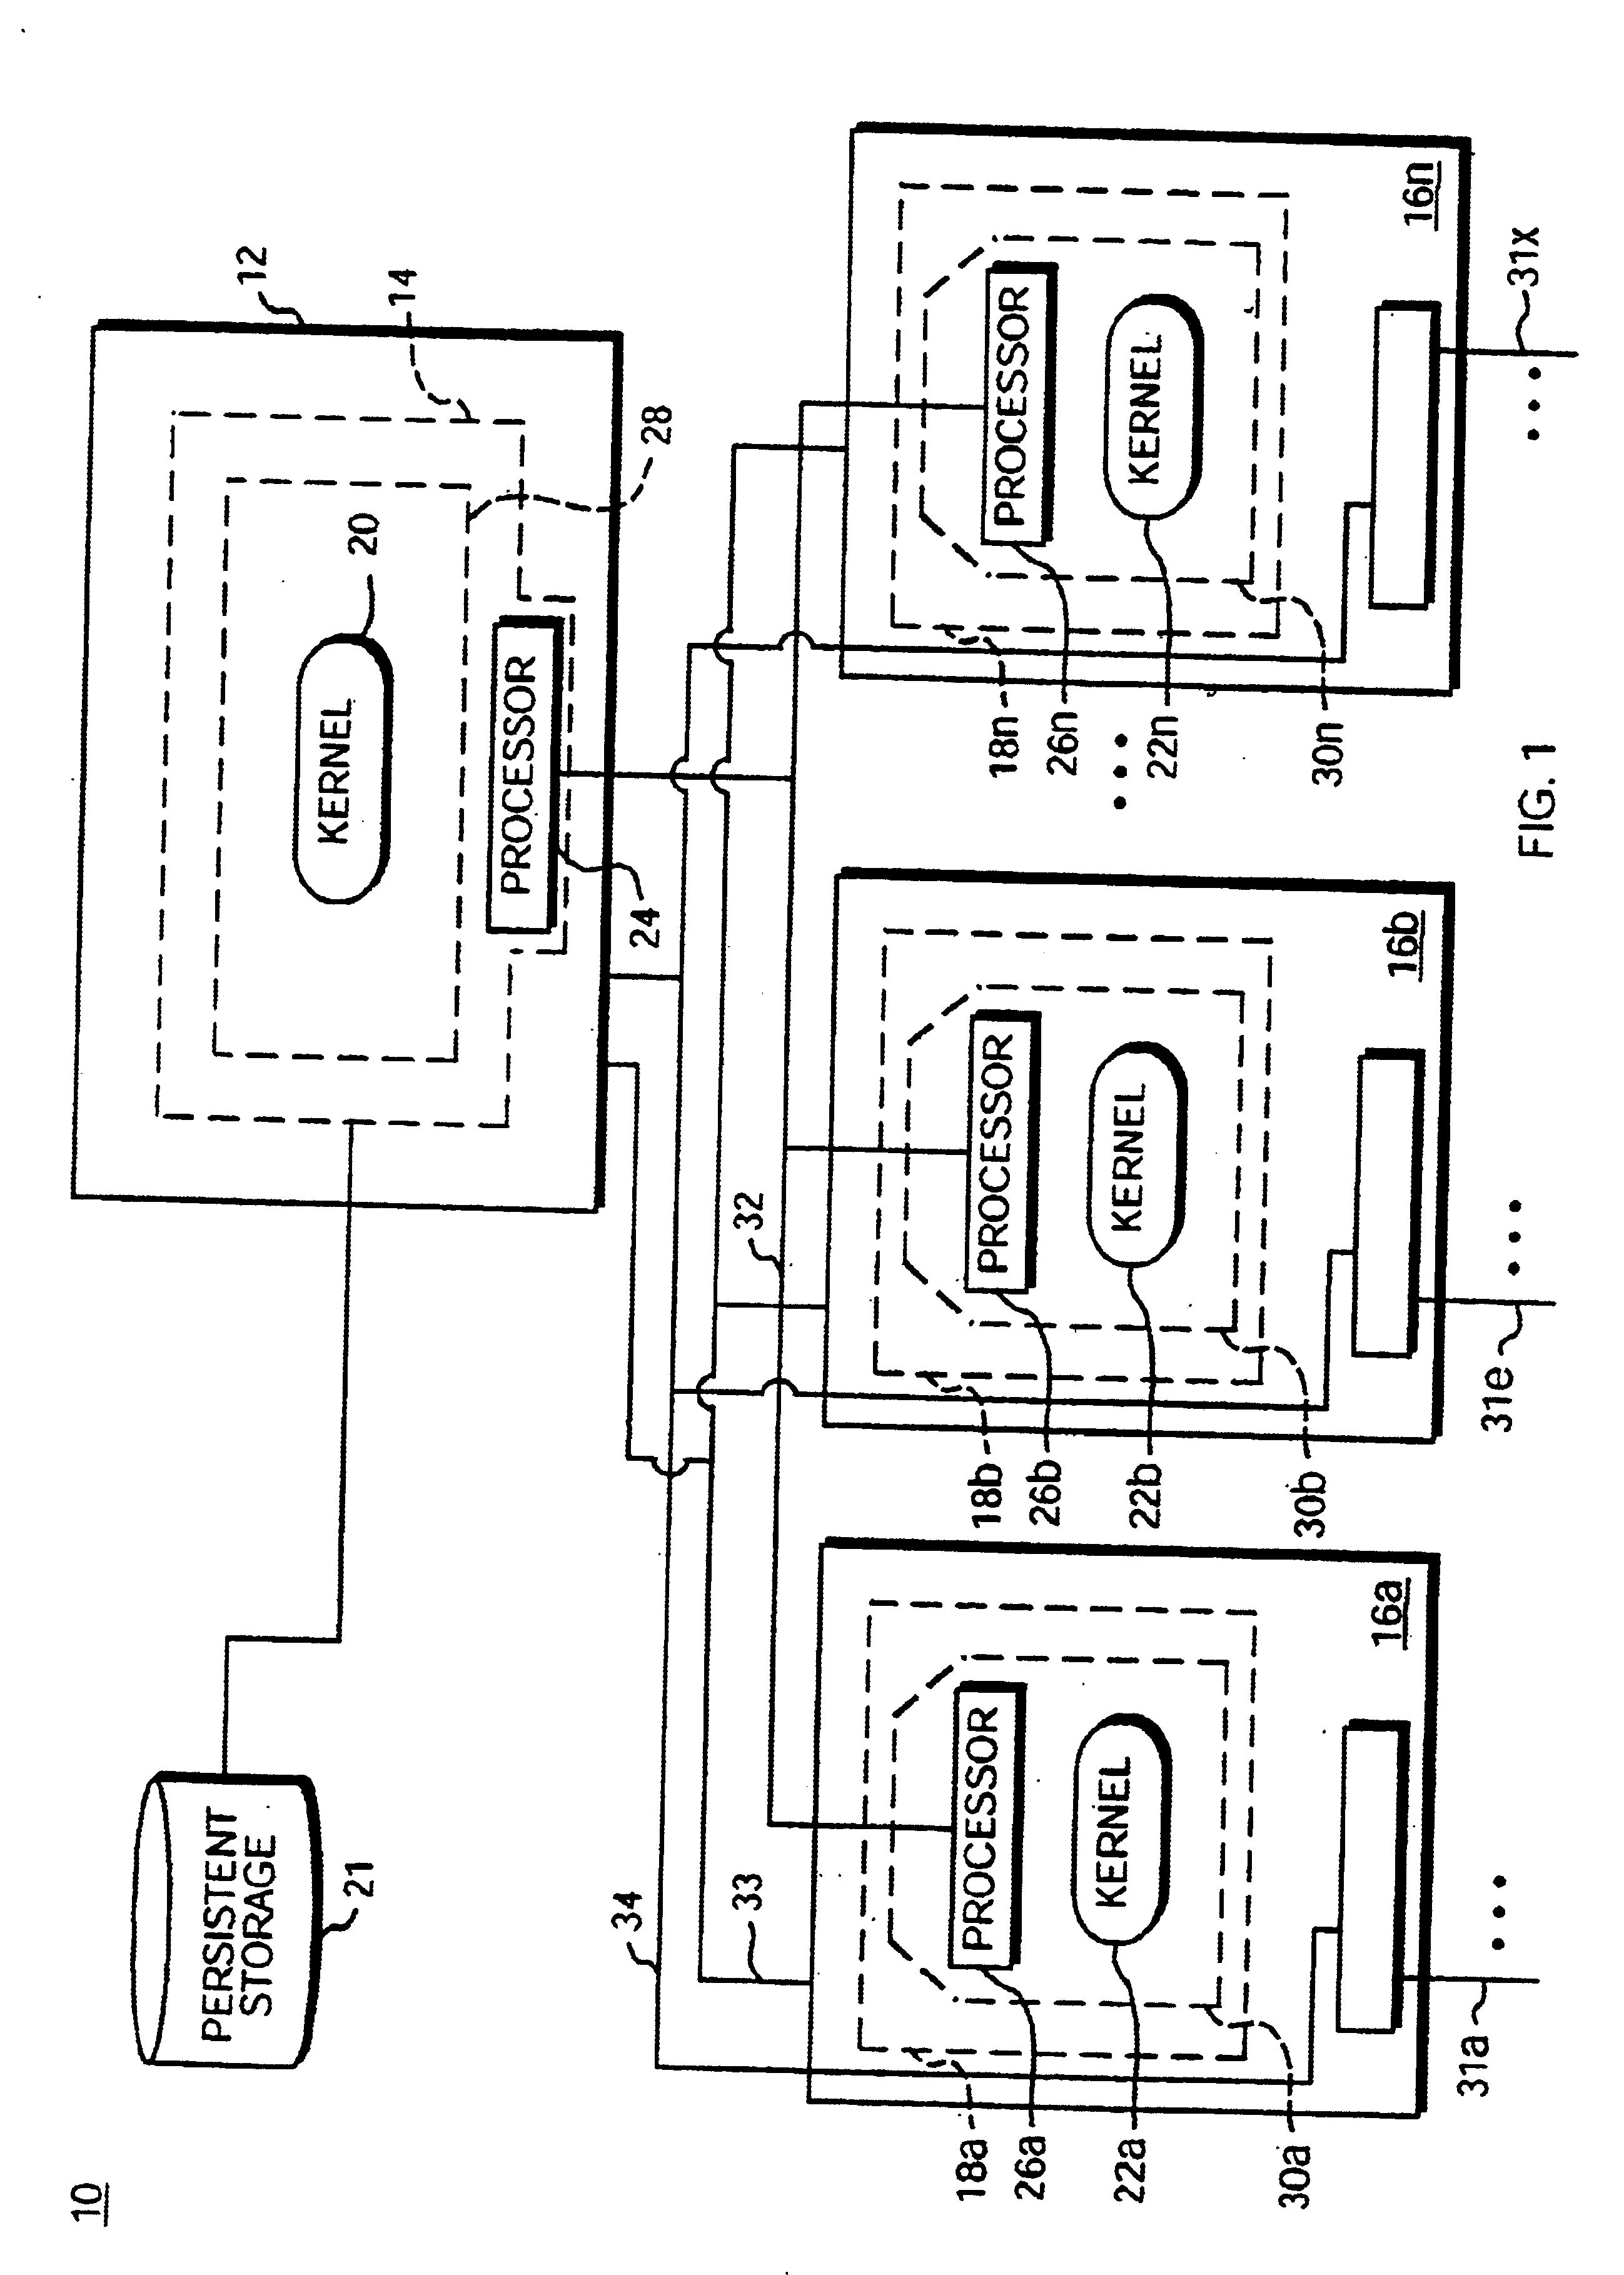 Network device with a distributed switch fabric timing system